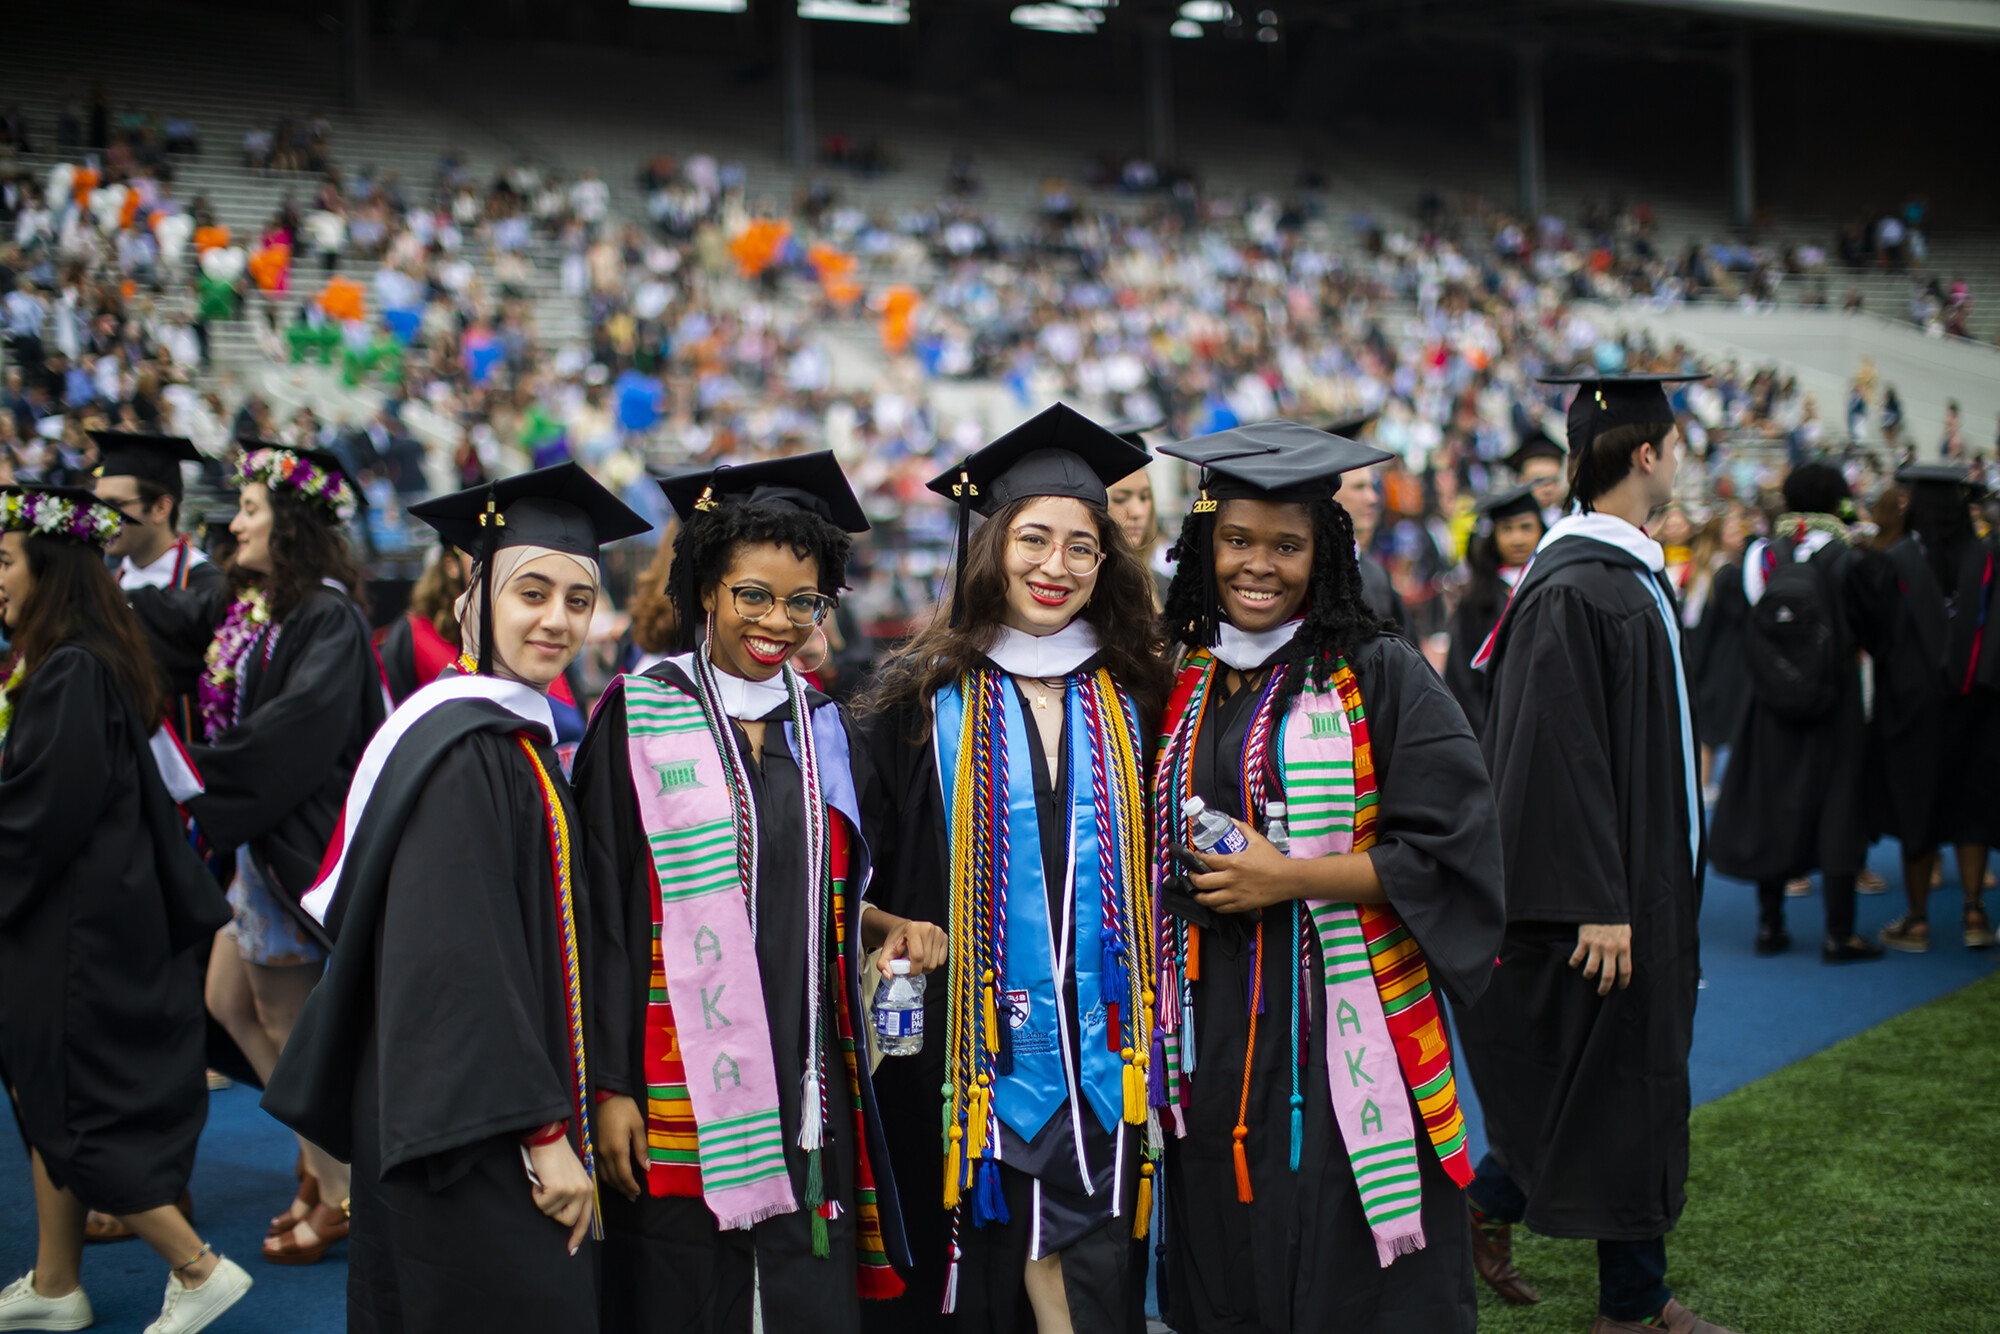 graduates posing for a photo during commencement